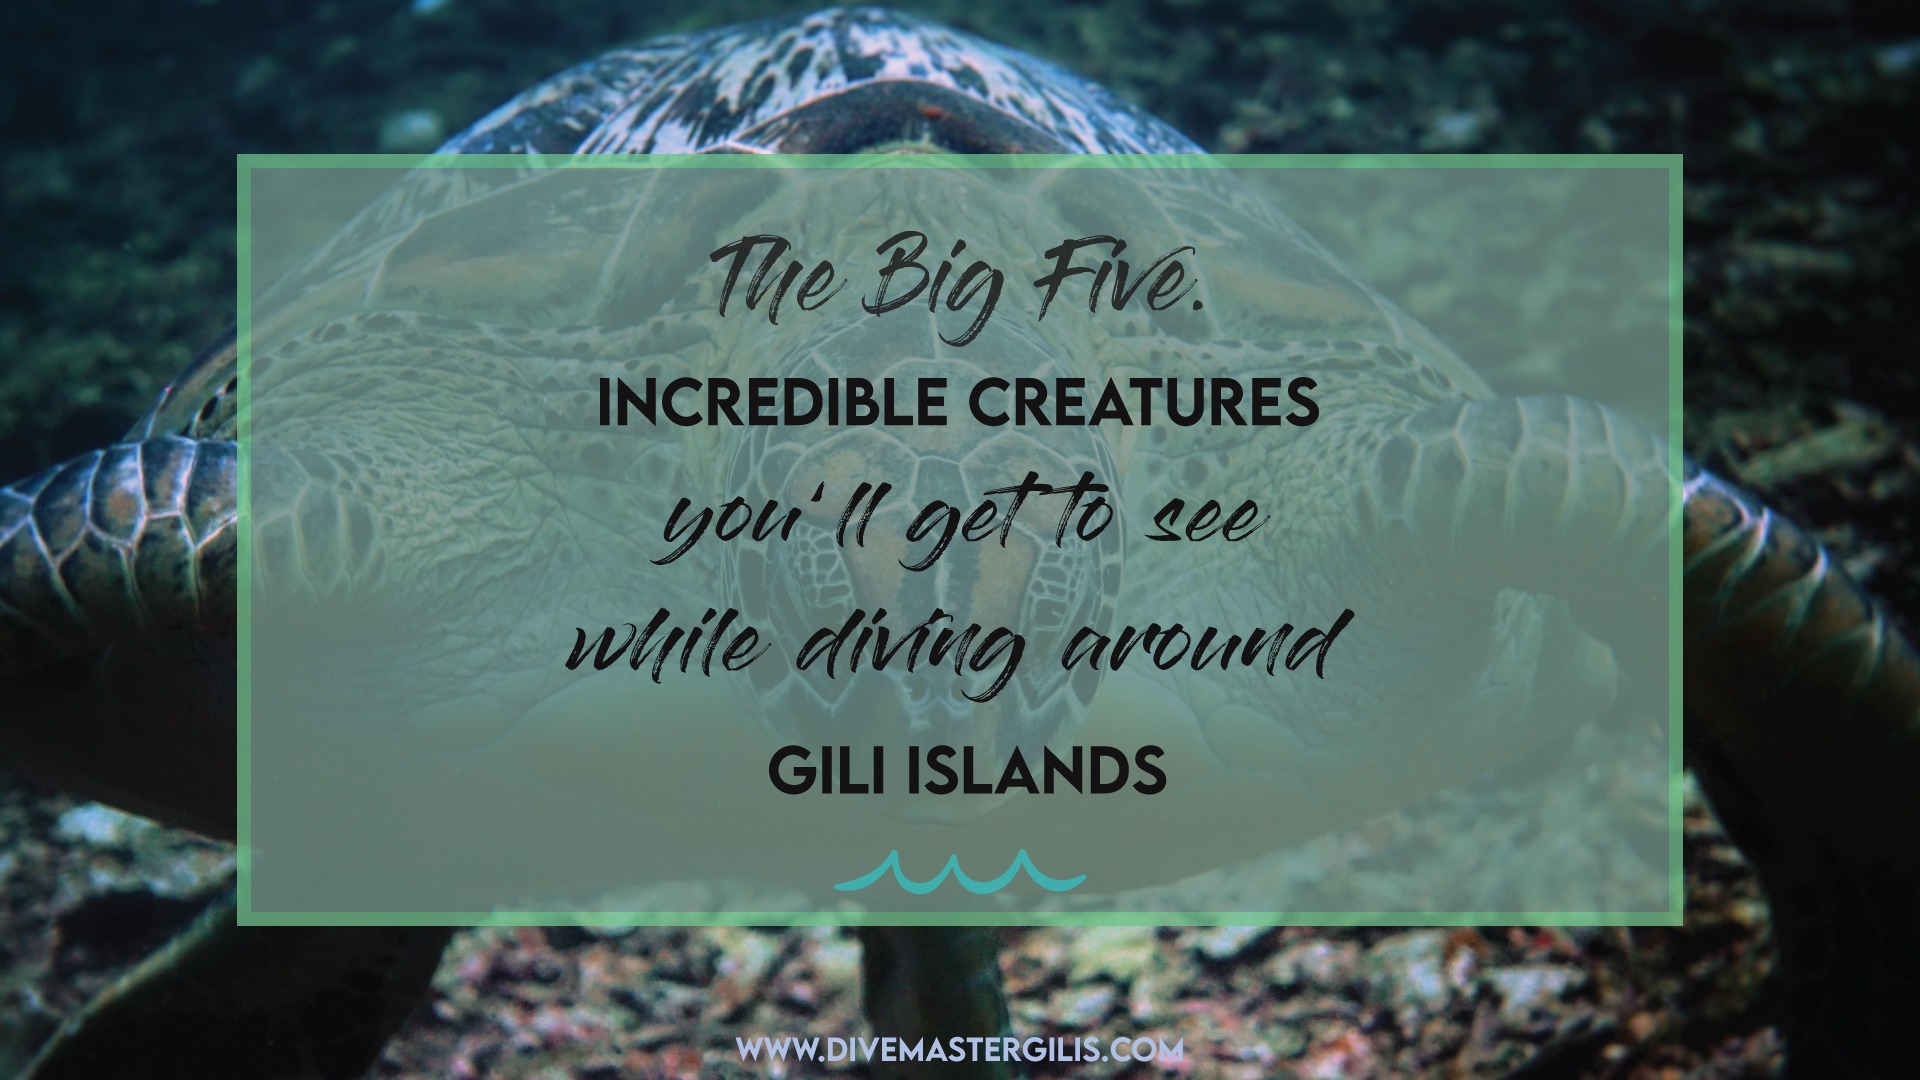 The big Five. Incredible creatures you'll get to see while diving around Gili Islands